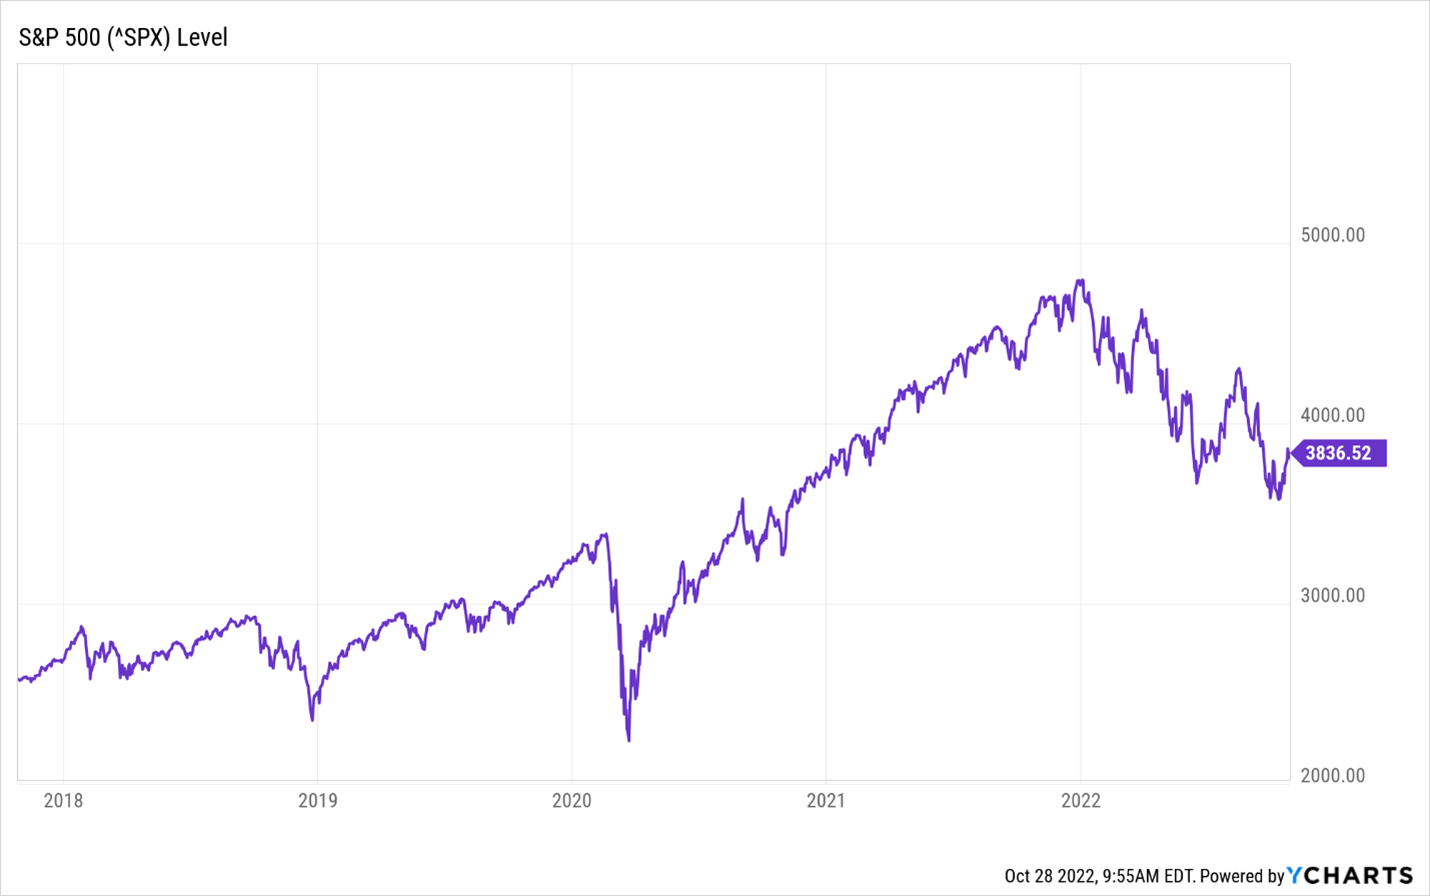 A chart showing the S&P 500’s movement from 2018 to 2022